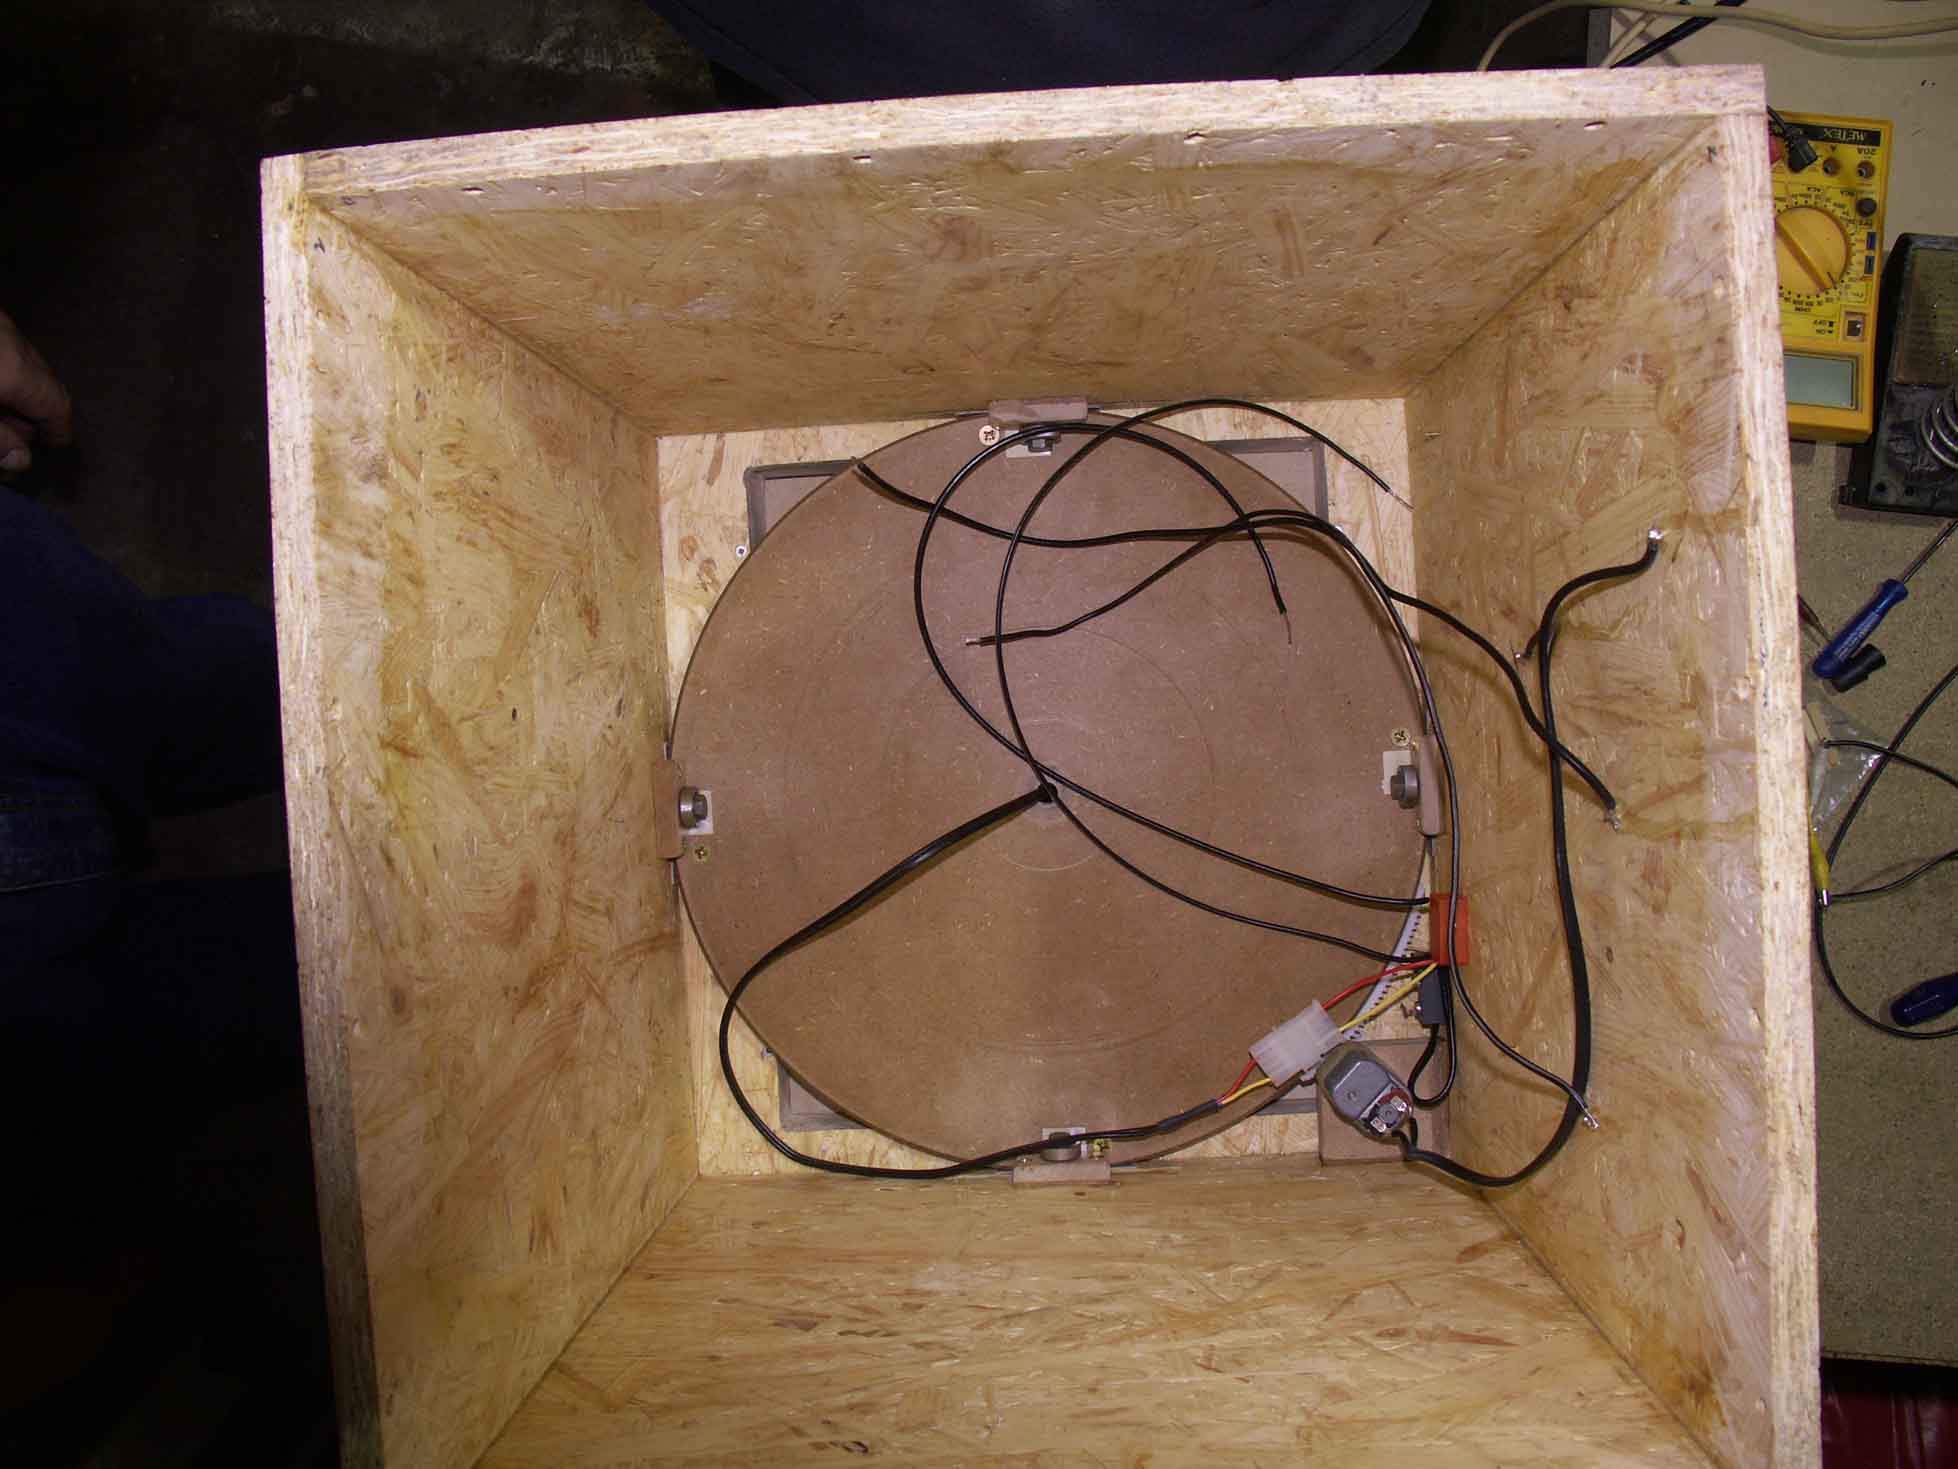 inside of box with wiring